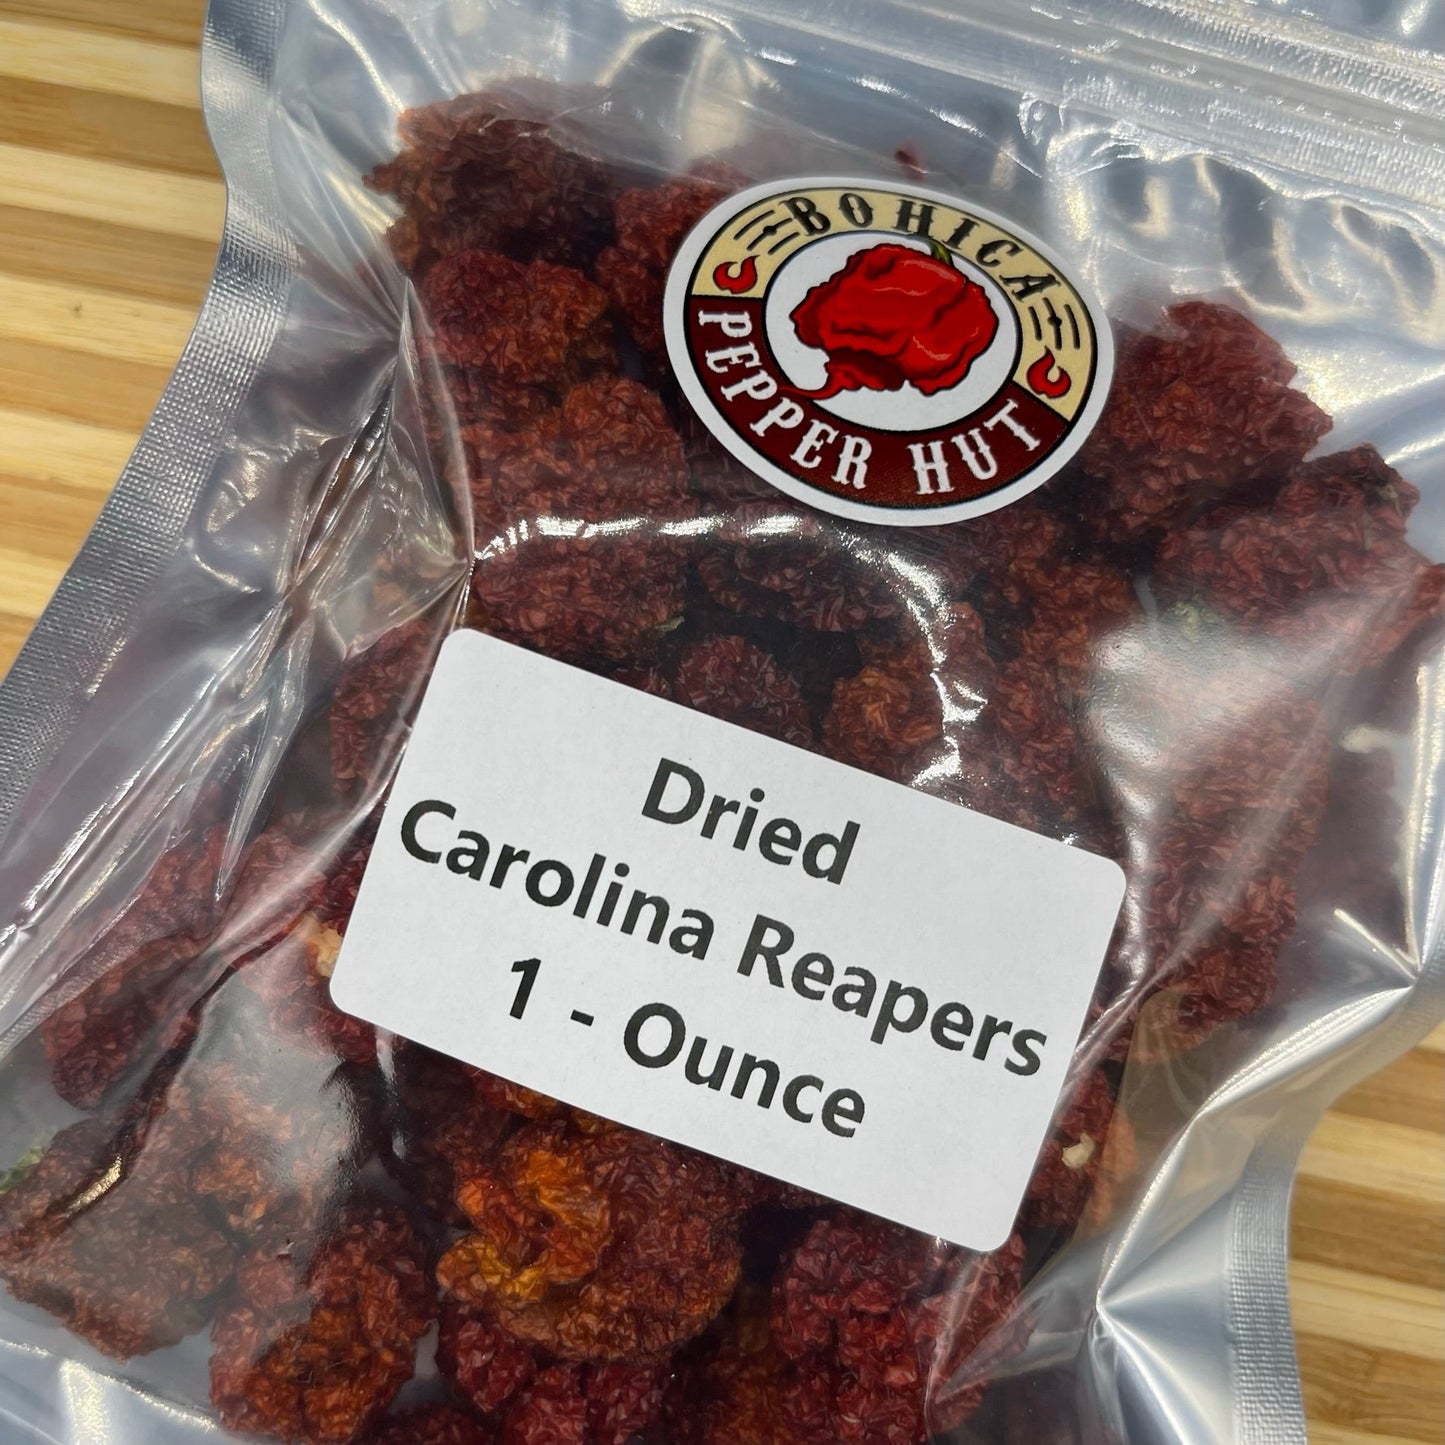 Dried (Dehydrated) Carolina Reaper Peppers